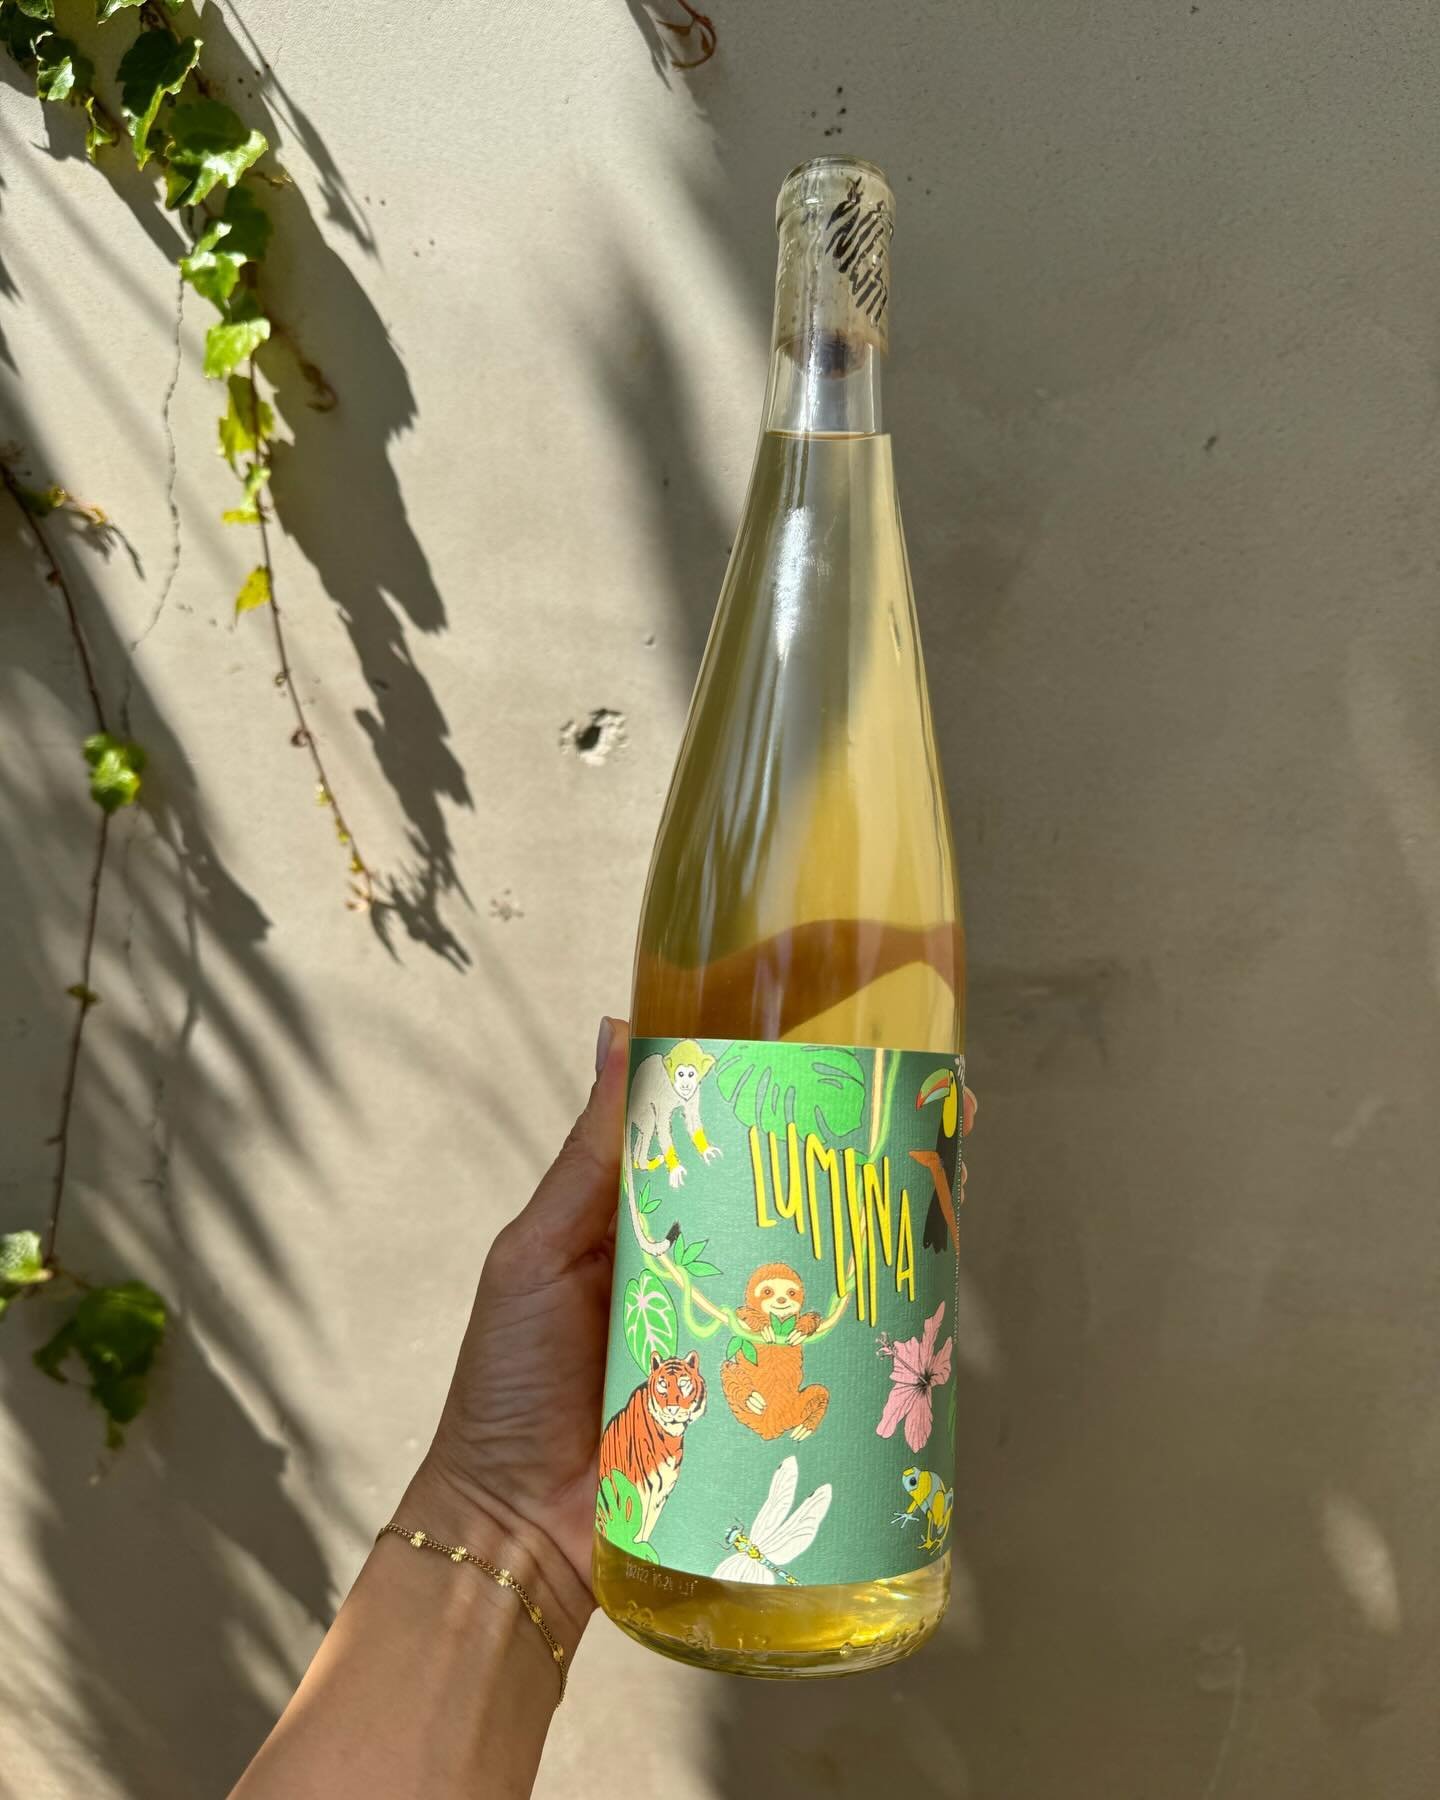 🛎️ Riesling 🔔 
By Lumina wines 
&bull;
On the nose, a bouquet of white flowers, key lime, apricot, a slight aroma of lychee, and citrus blossom. The palate is vivacious with orange blossom, key lime, and apricot.
Now pouring 🥂